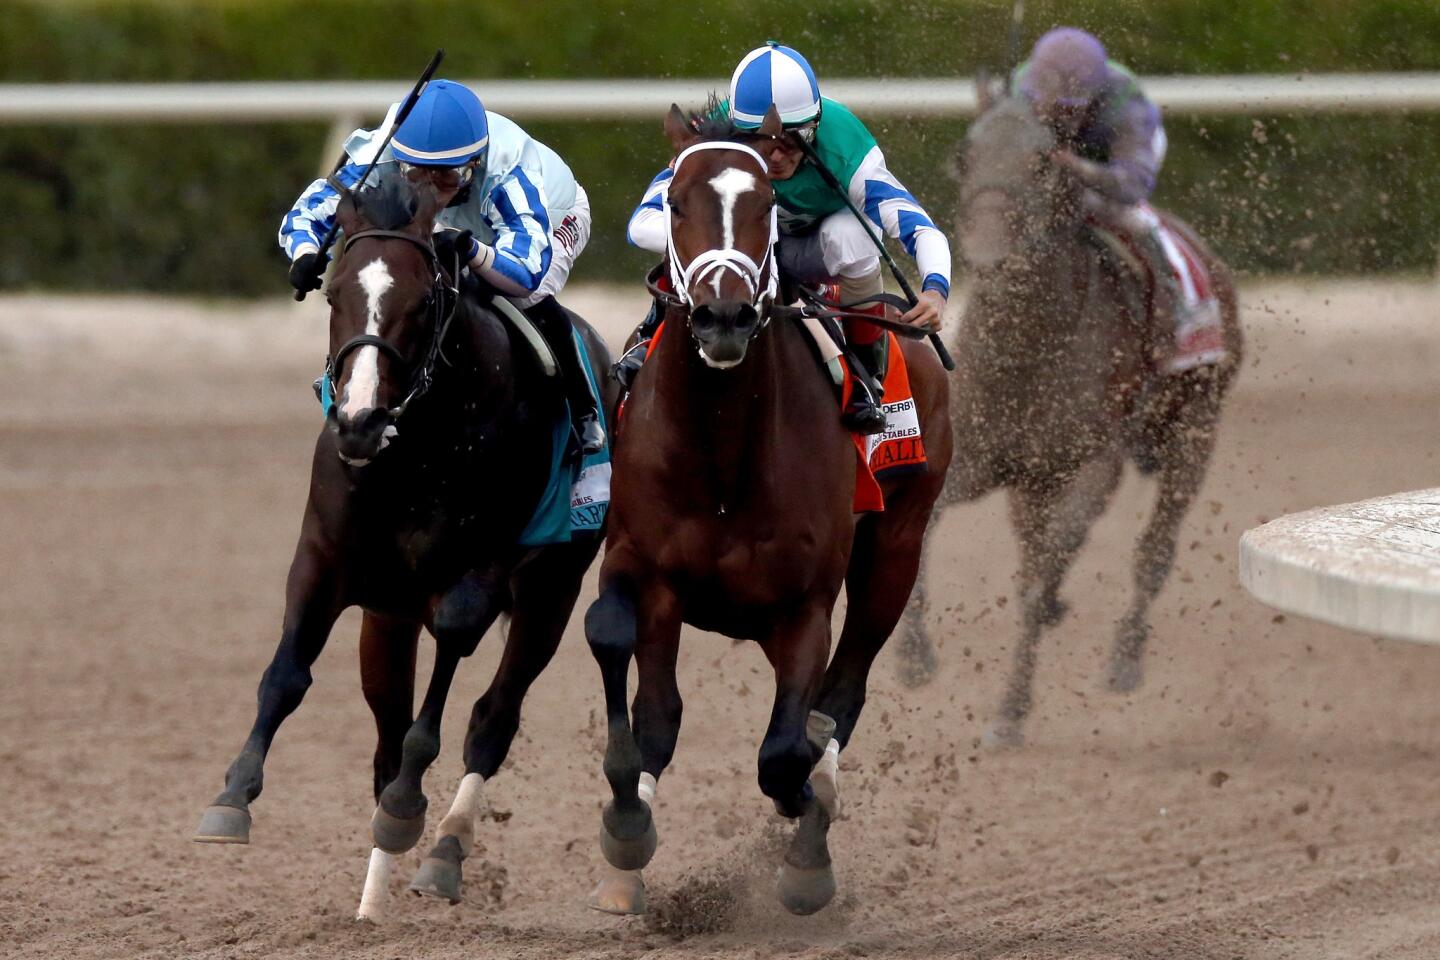 10. Upstart (pictured at left)